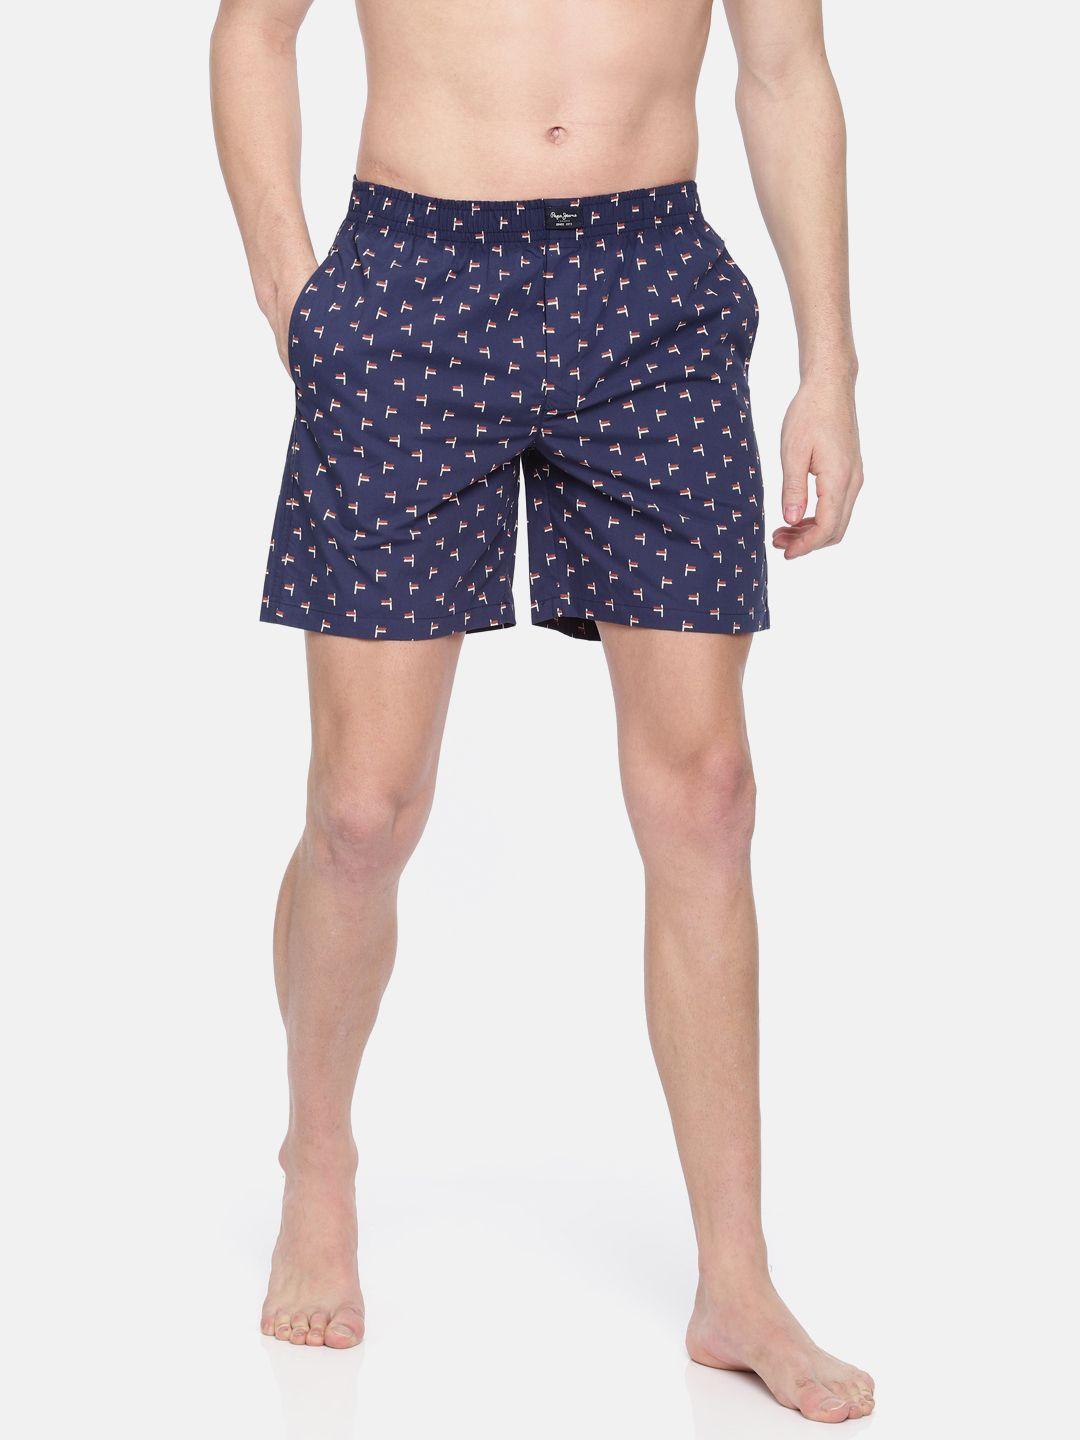 pepe-jeans-men-navy-&-red-printed----pure-cotton-boxers-8904311306207